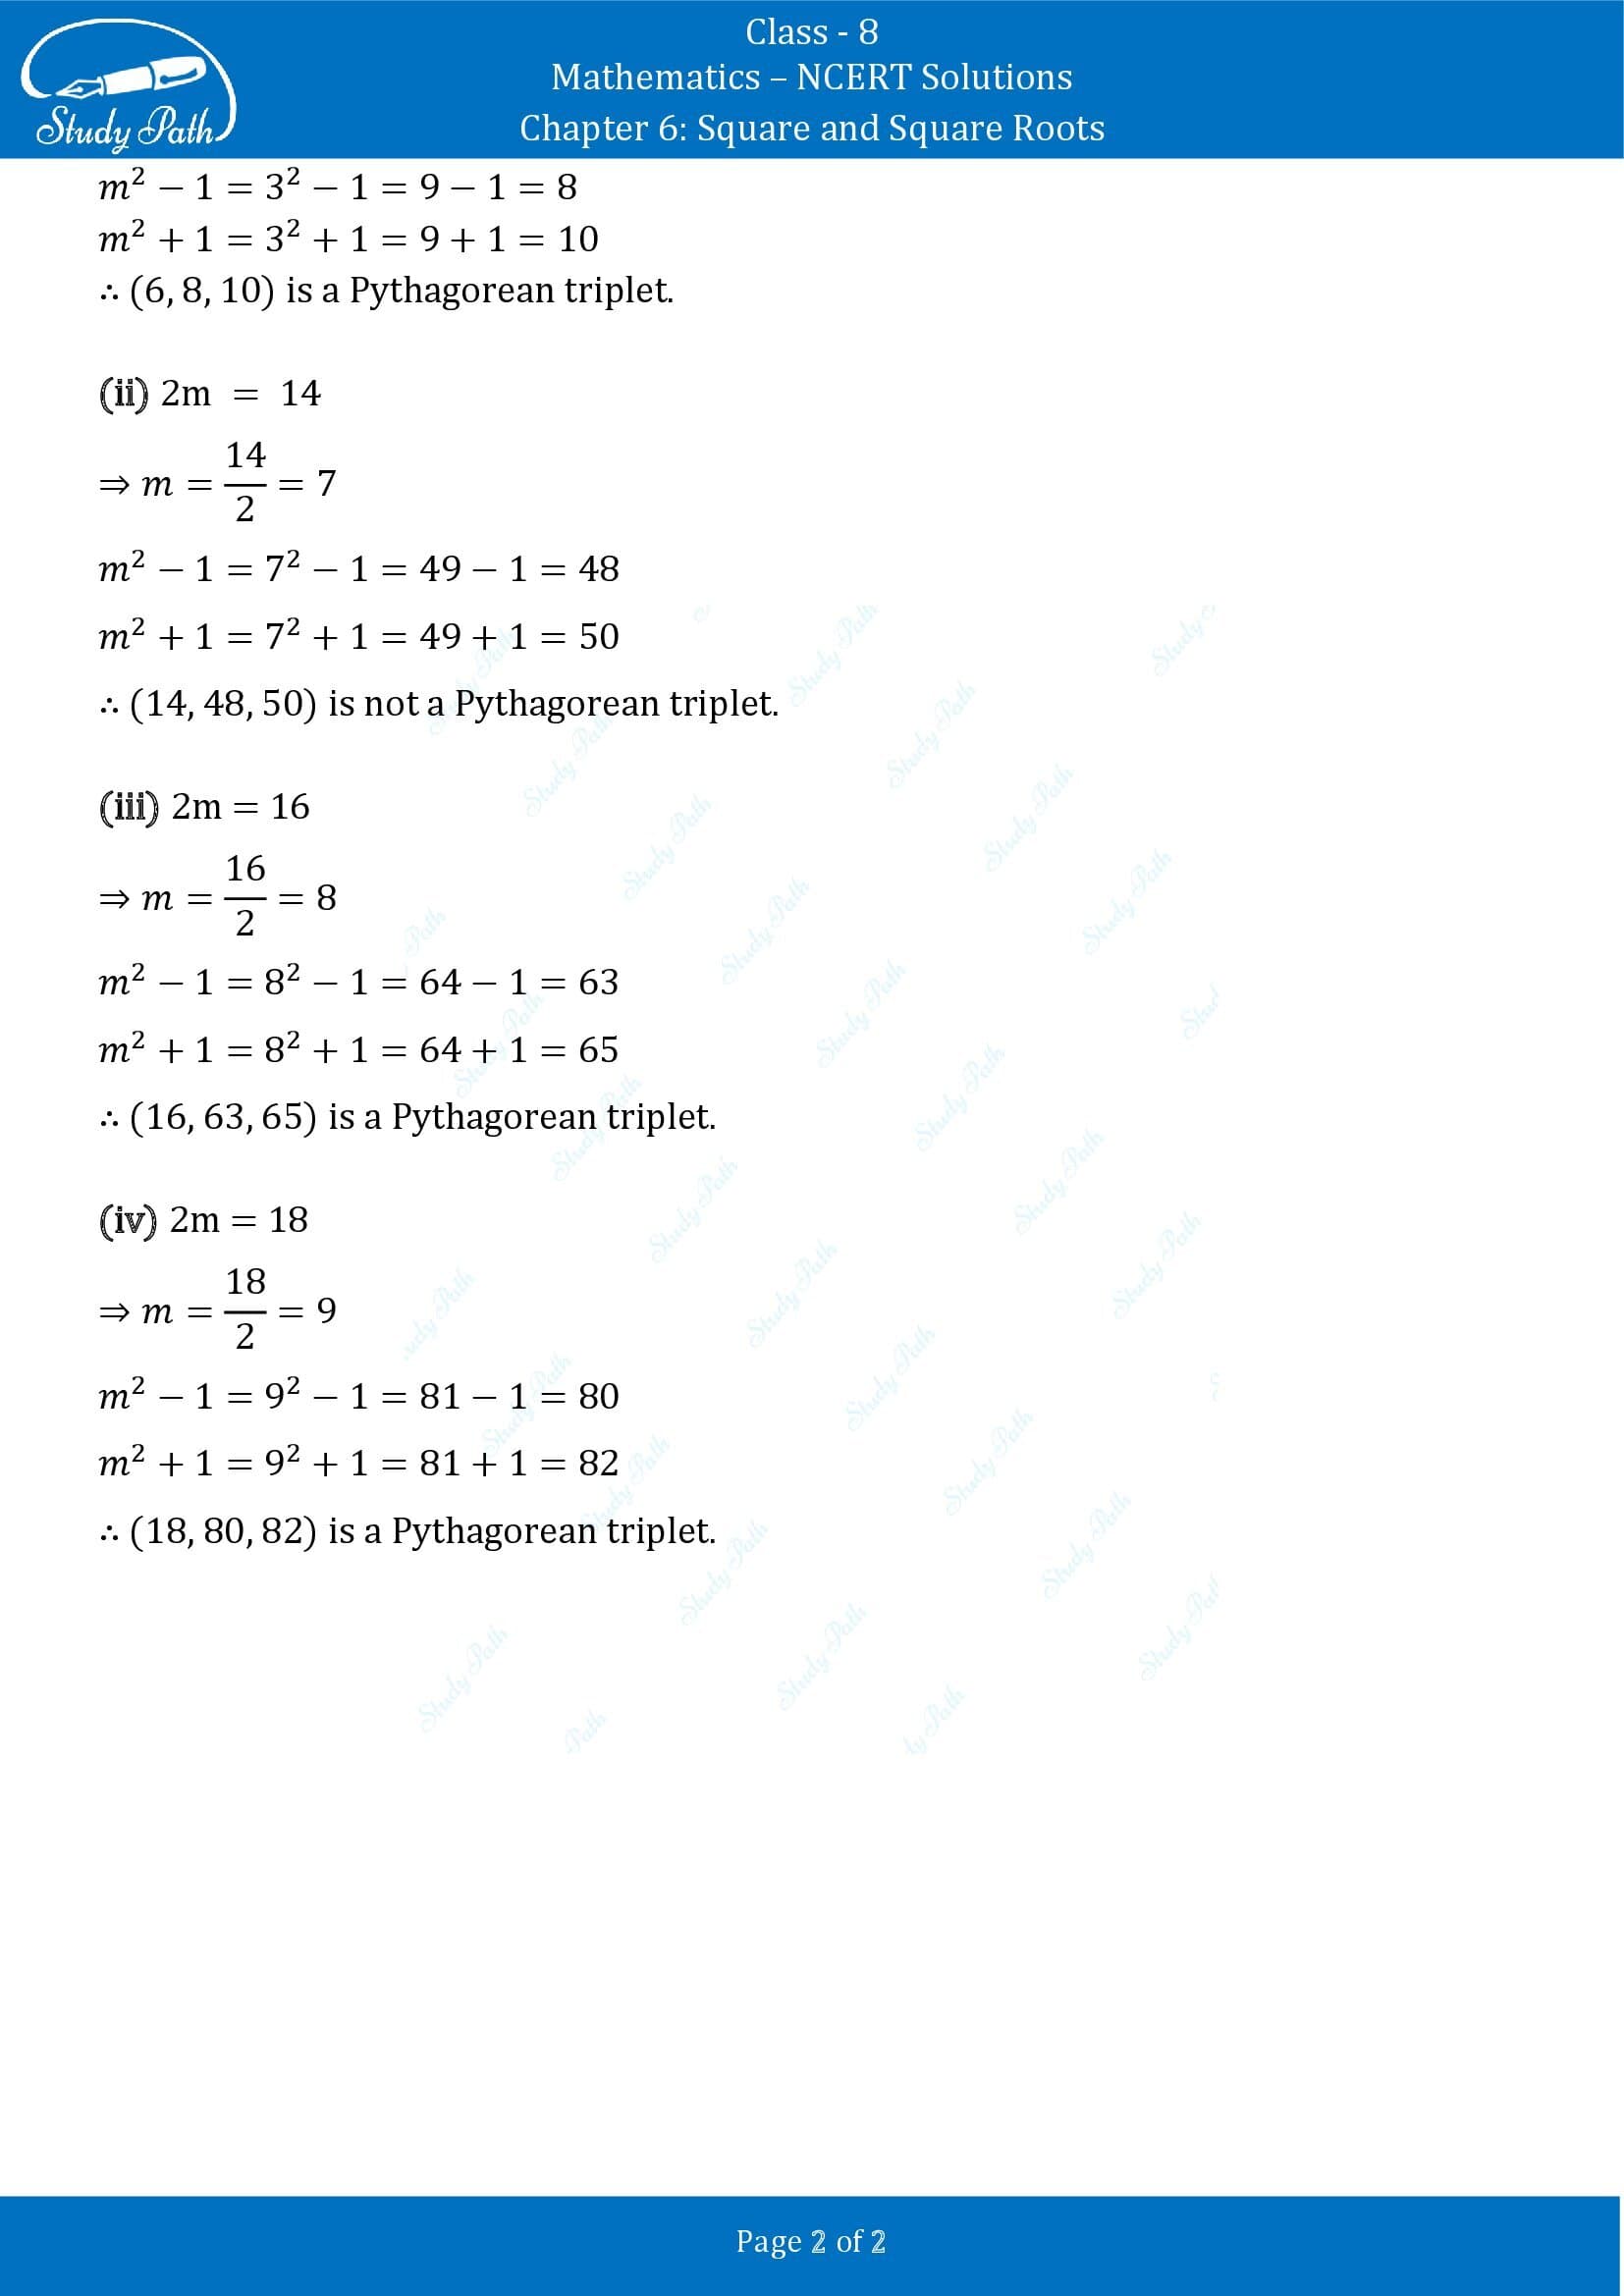 NCERT Solutions for Class 8 Maths Chapter 6 Square and Square Roots Exercise 6.2 00002